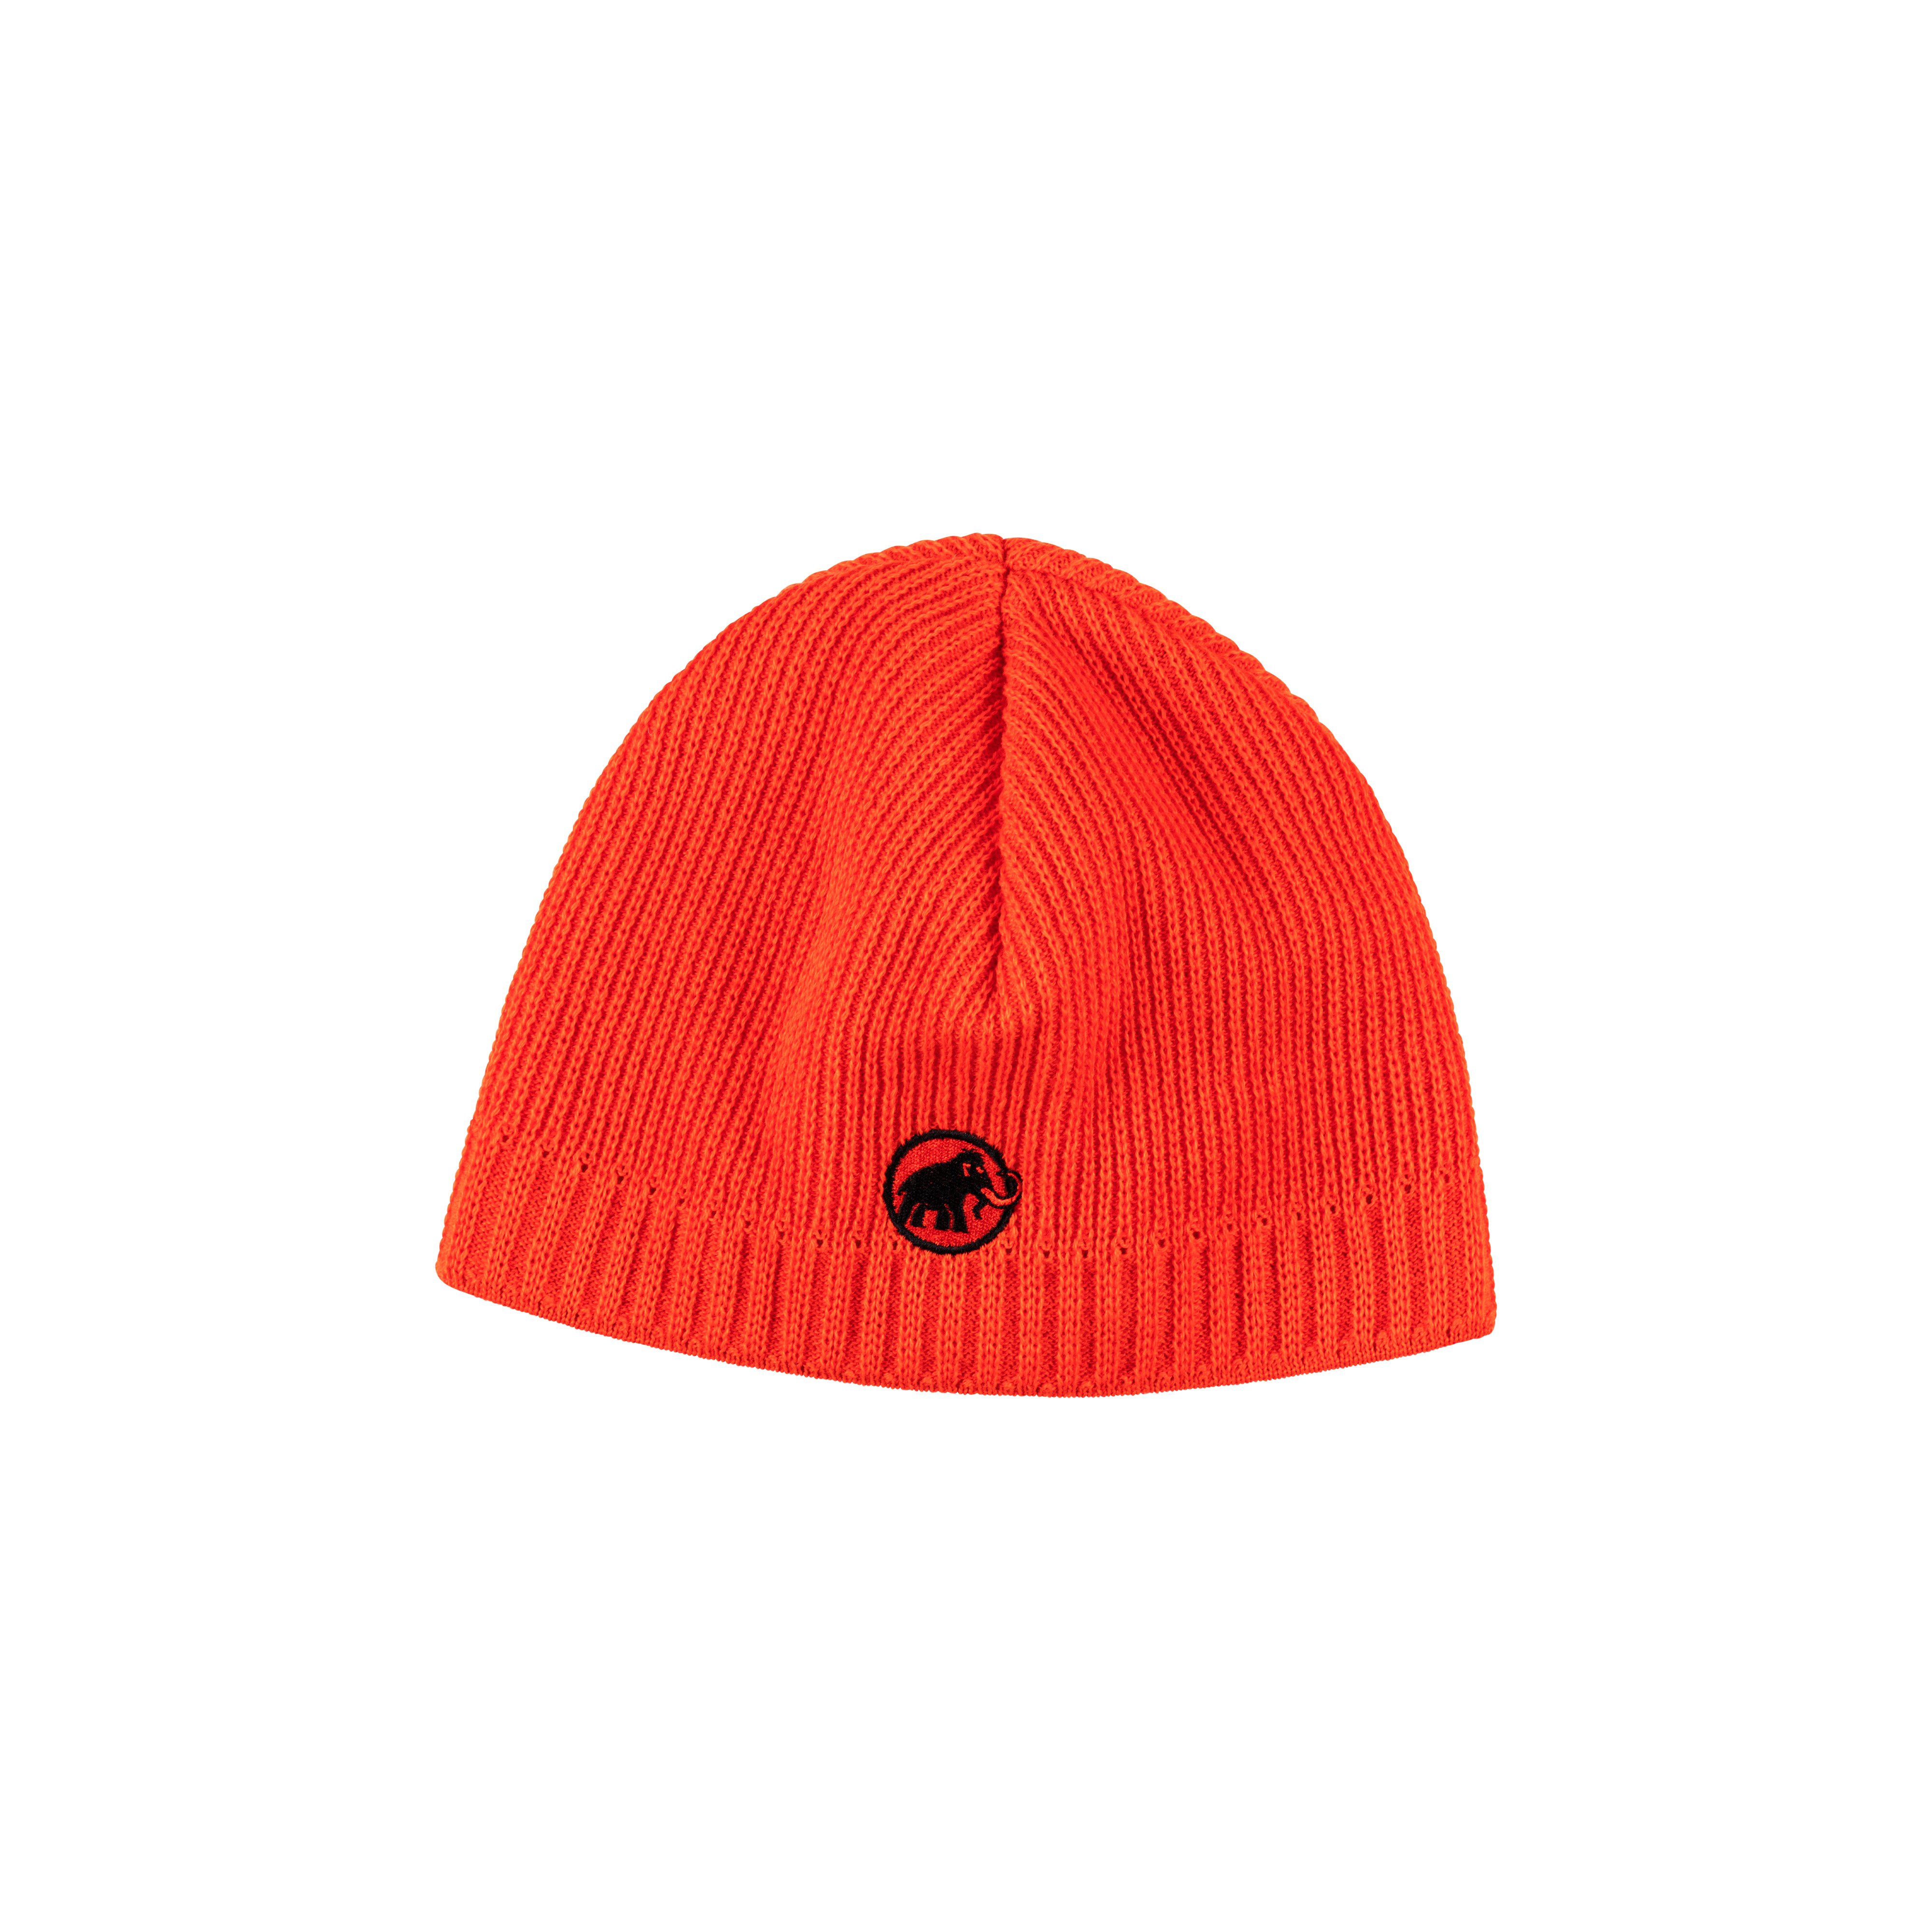 Sublime Beanie - hot red, one size product image